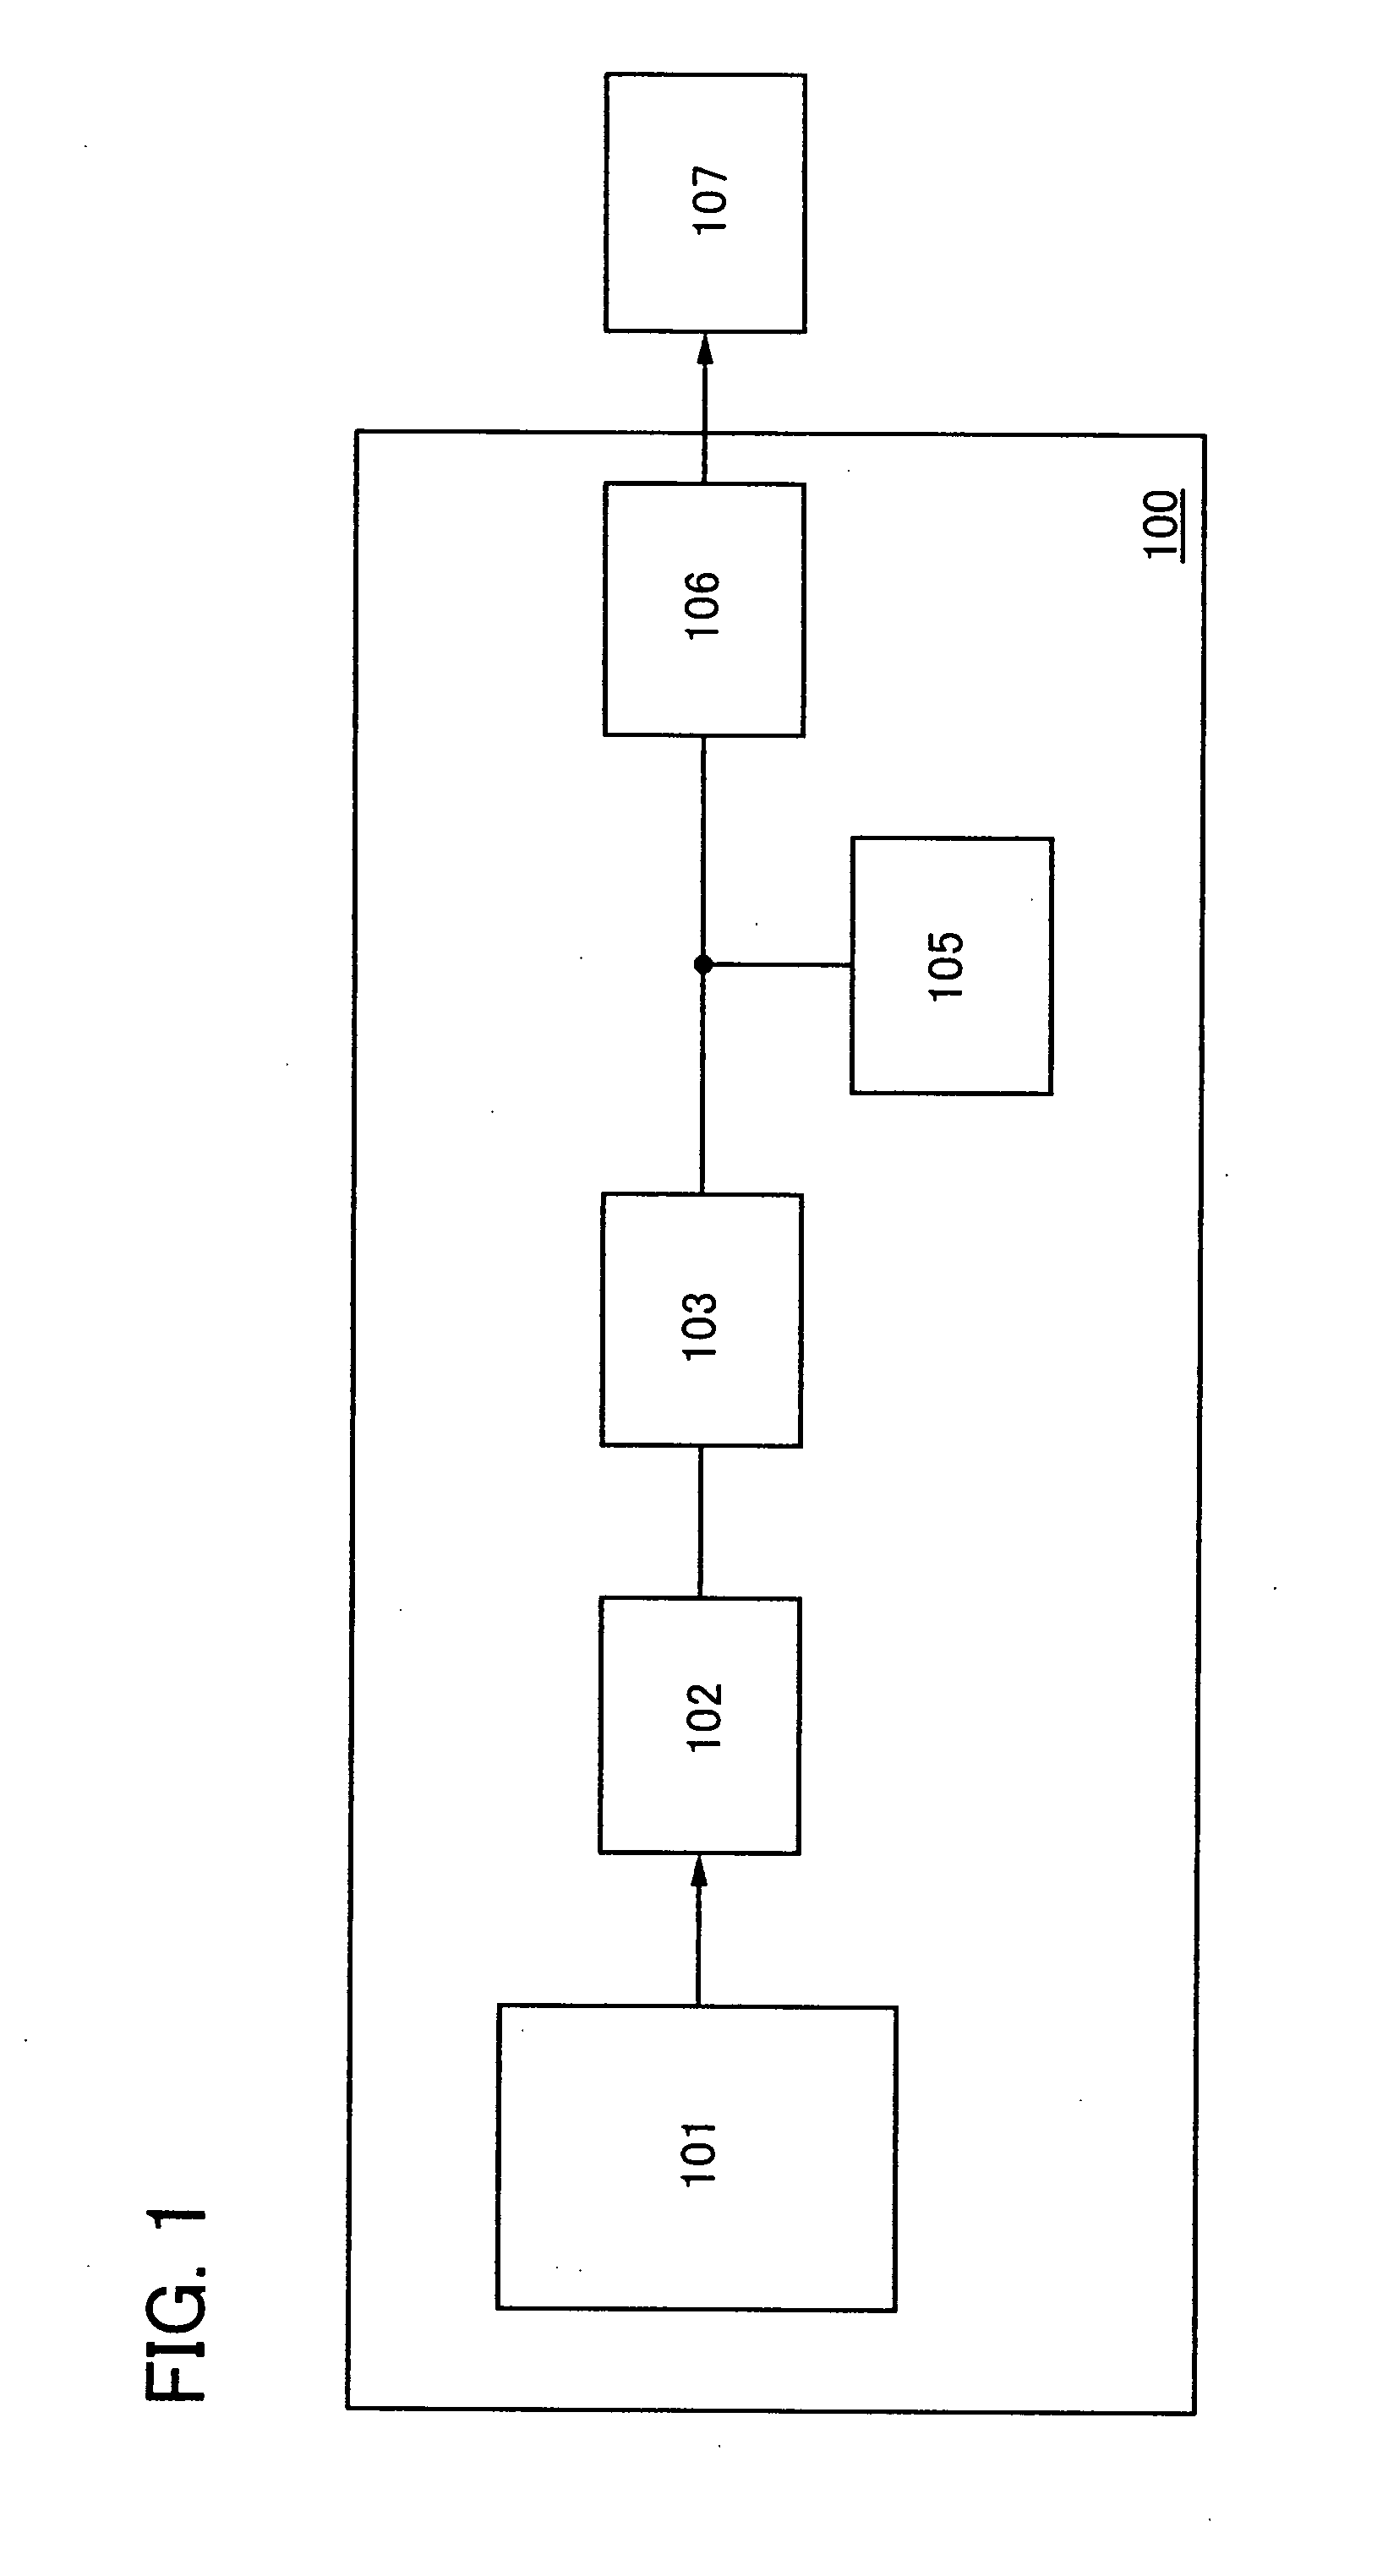 Wireless power storage device, semiconductor device including the wireless power storage device, and method for operating the same